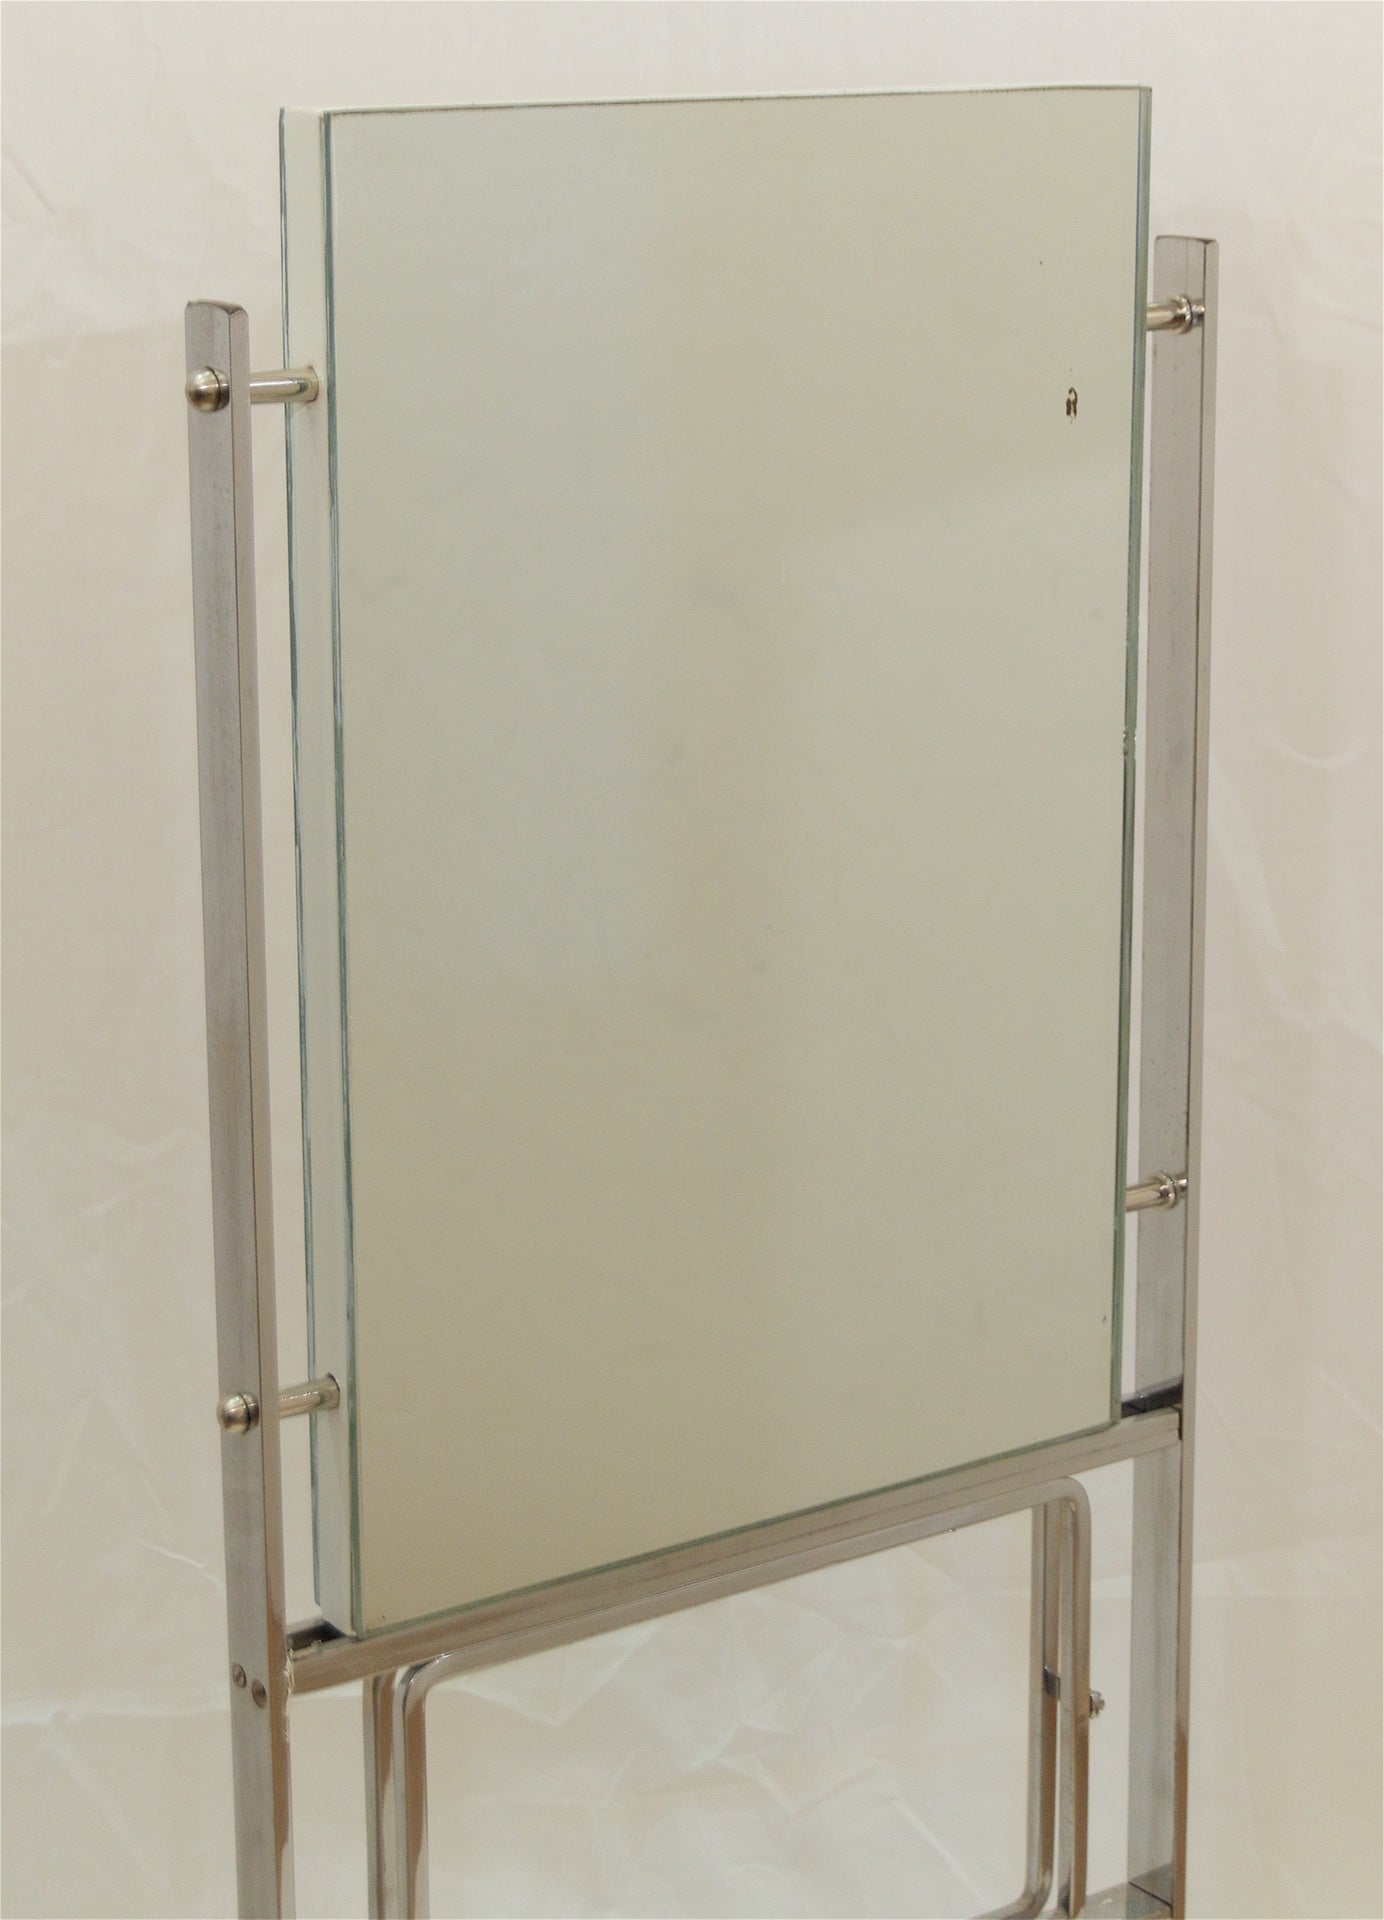 Unusual and Large Double-Sided Deco Display Mirror